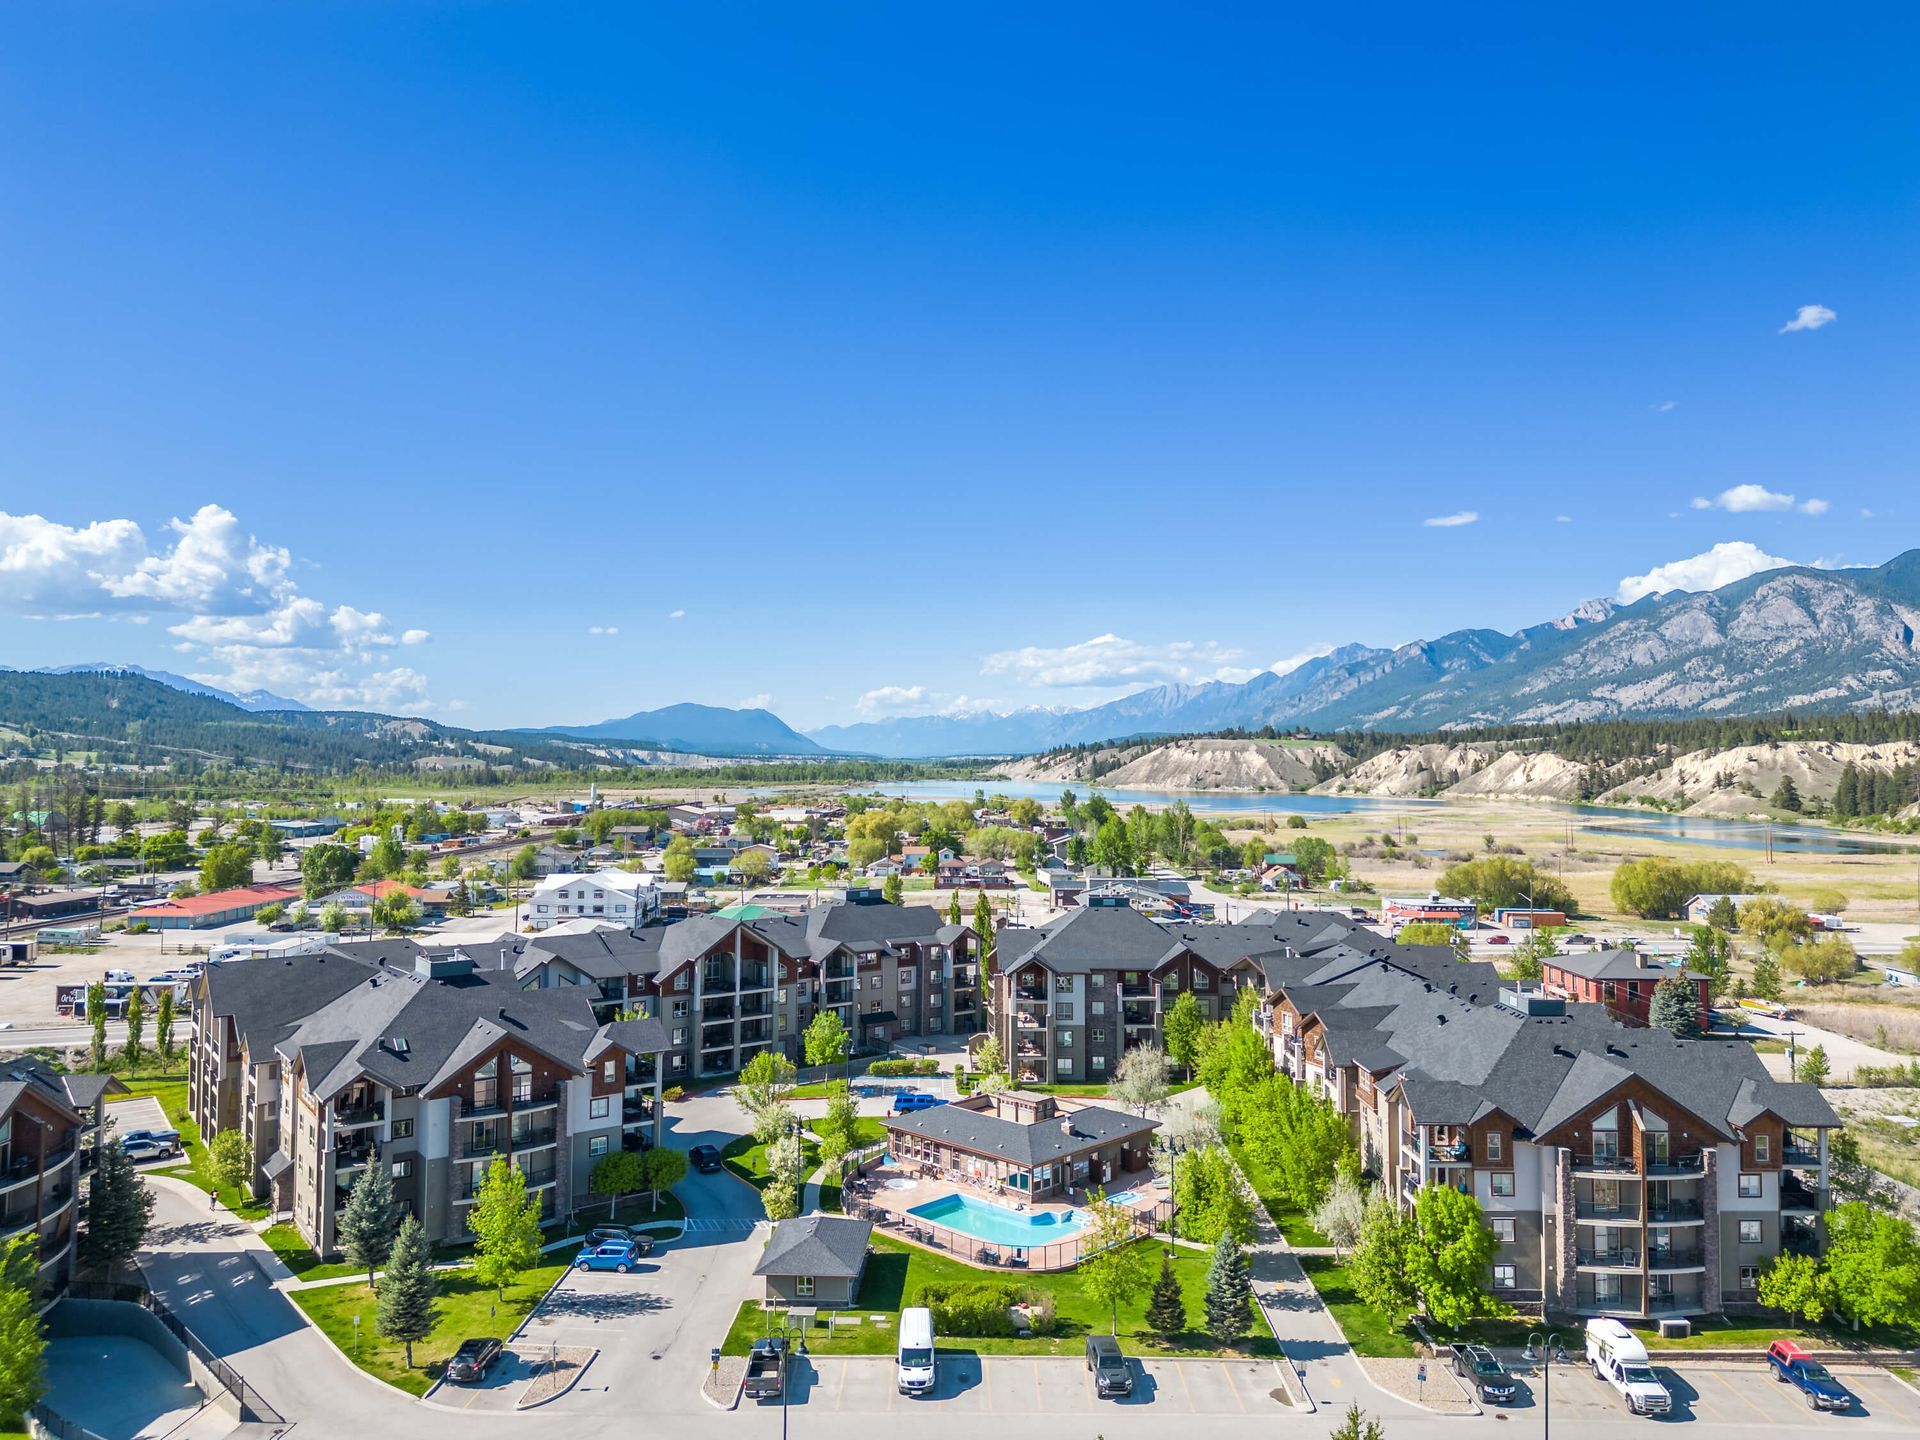 the Lake Windermere Pointe Condos in Invermere, BC managed by Aisling Baile Property Management